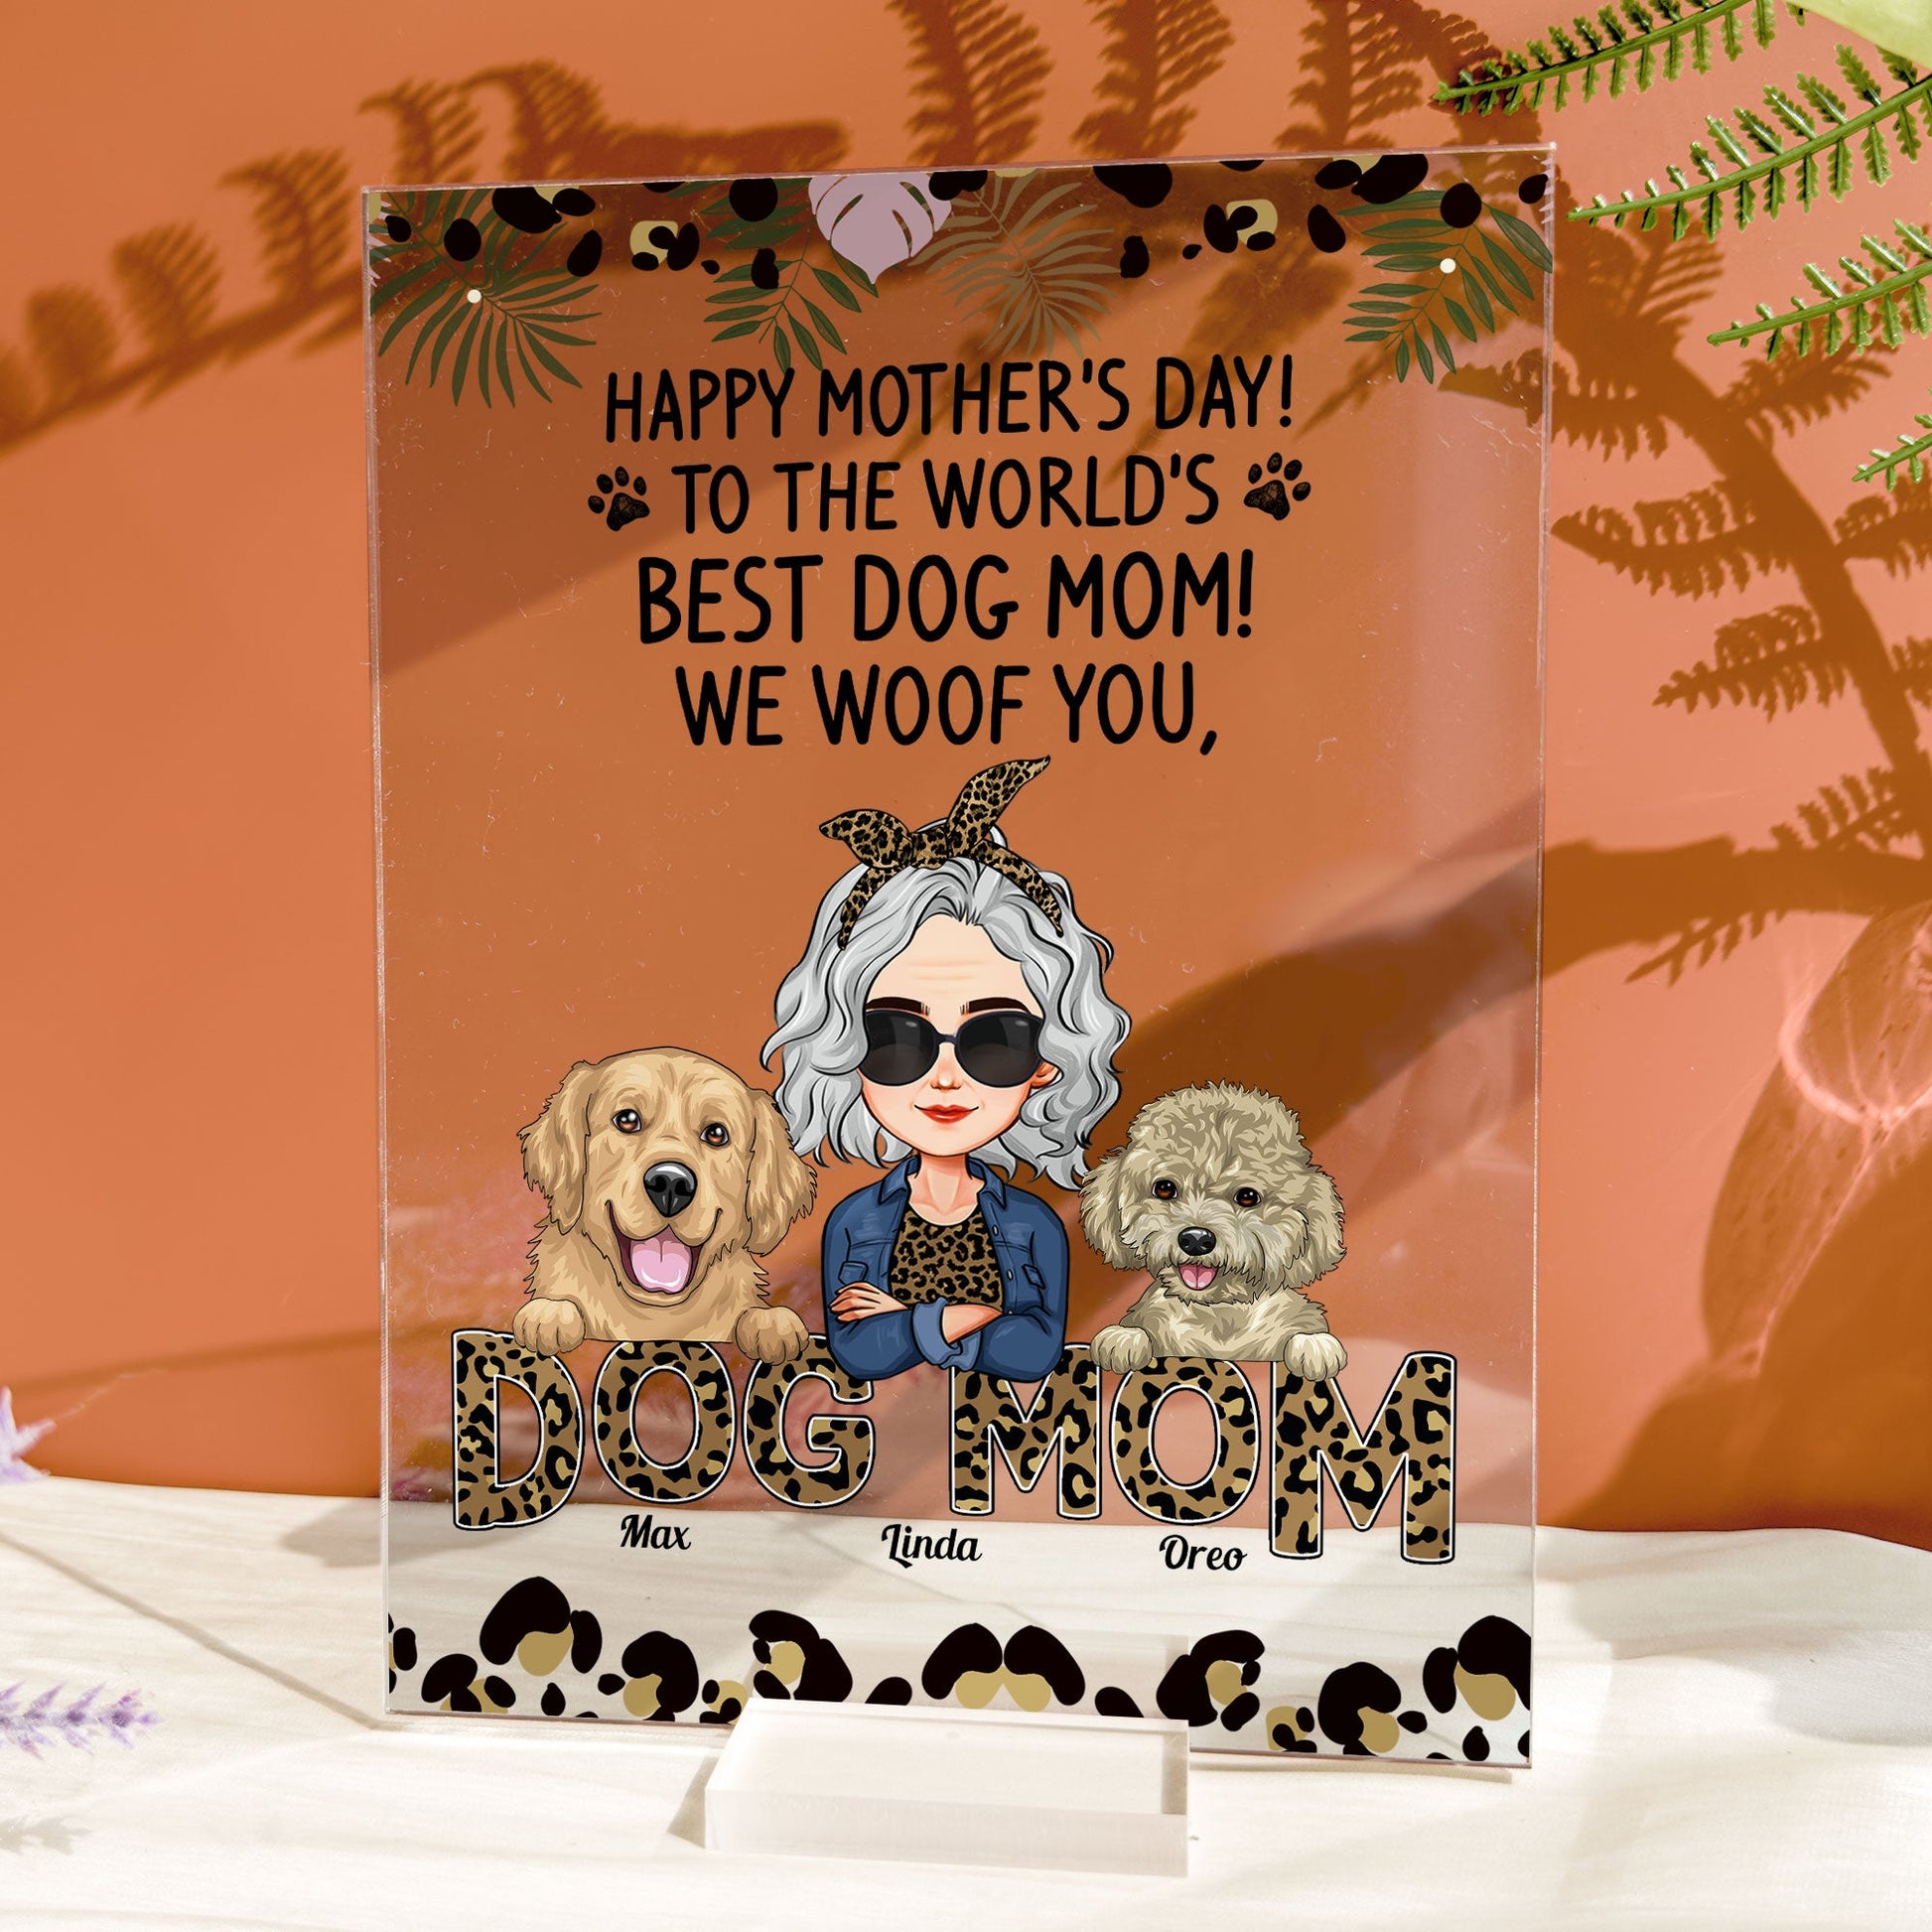 Happy Mother's Day, Best Dog Mom, I Woof You, Custom Shirt For Dog